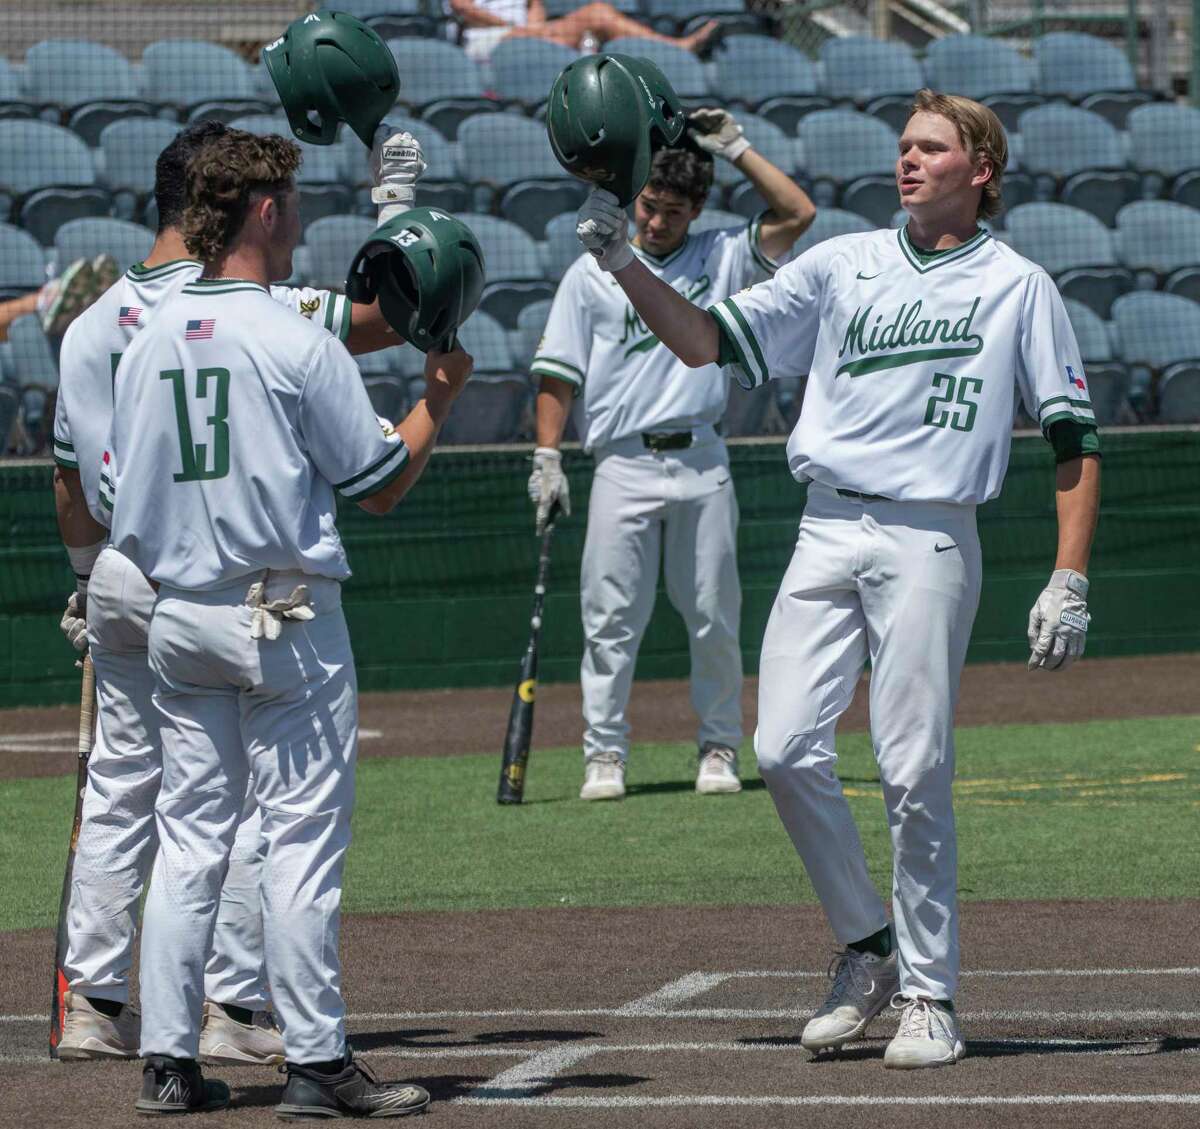 Midland College's Michael Weidner is congratulated by teammates at home plate after a two-run home run against Western Texas College 04/29/2020 at Christensen Stadium. Tim Fischer/Reporter-Telegram